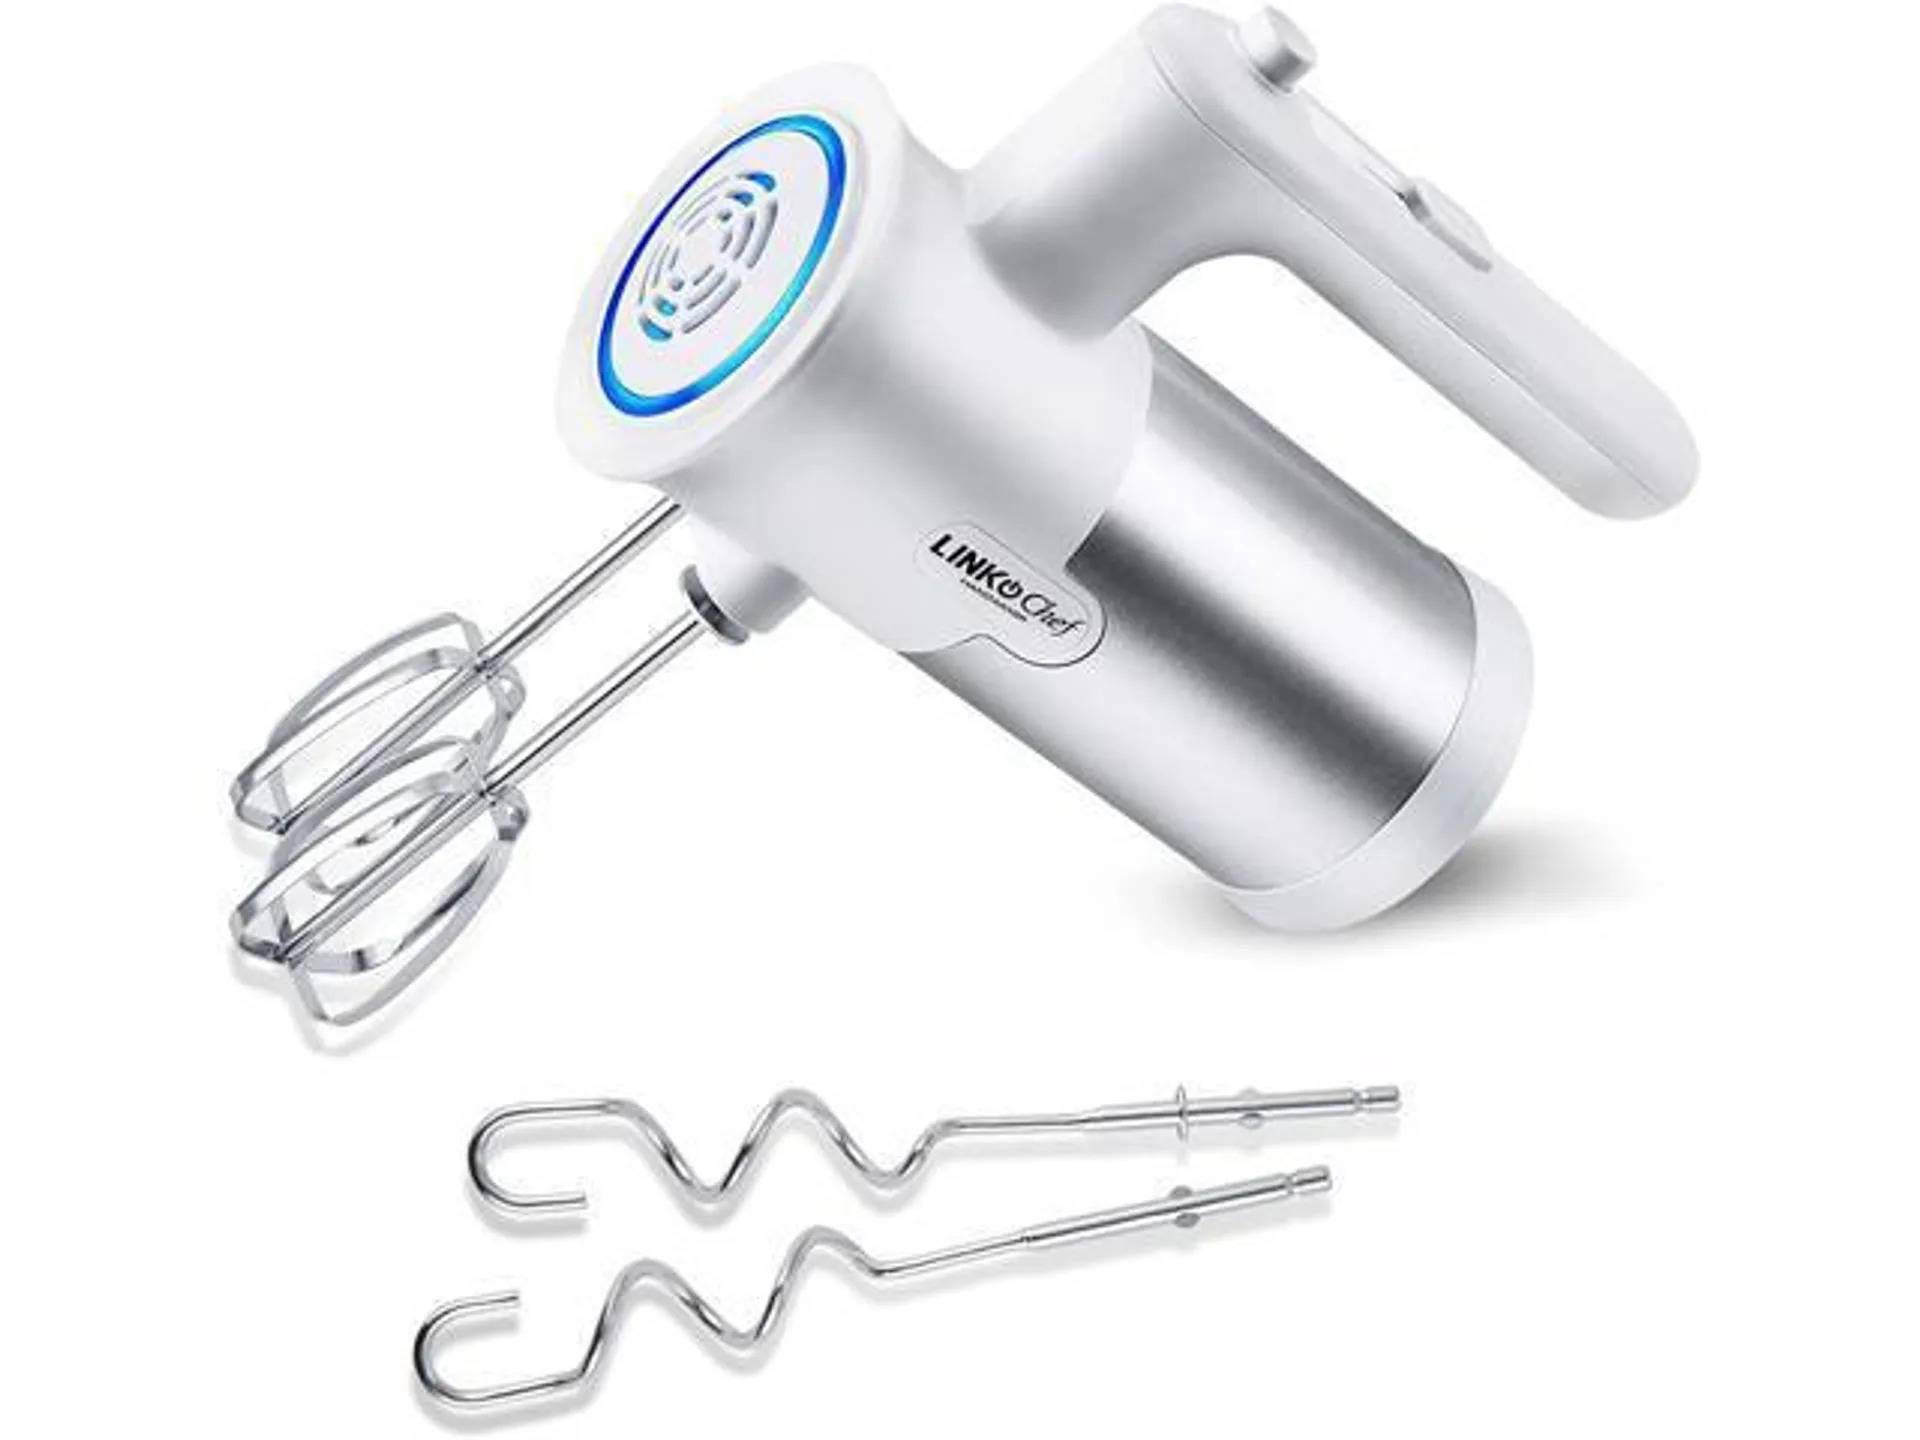 Hand Mixer, LINKChef Hand Mixer Electric 5 speed beater for Whipping + Mixing Cookies, Brownies, Cakes, Dough, Batters, Meringues & More